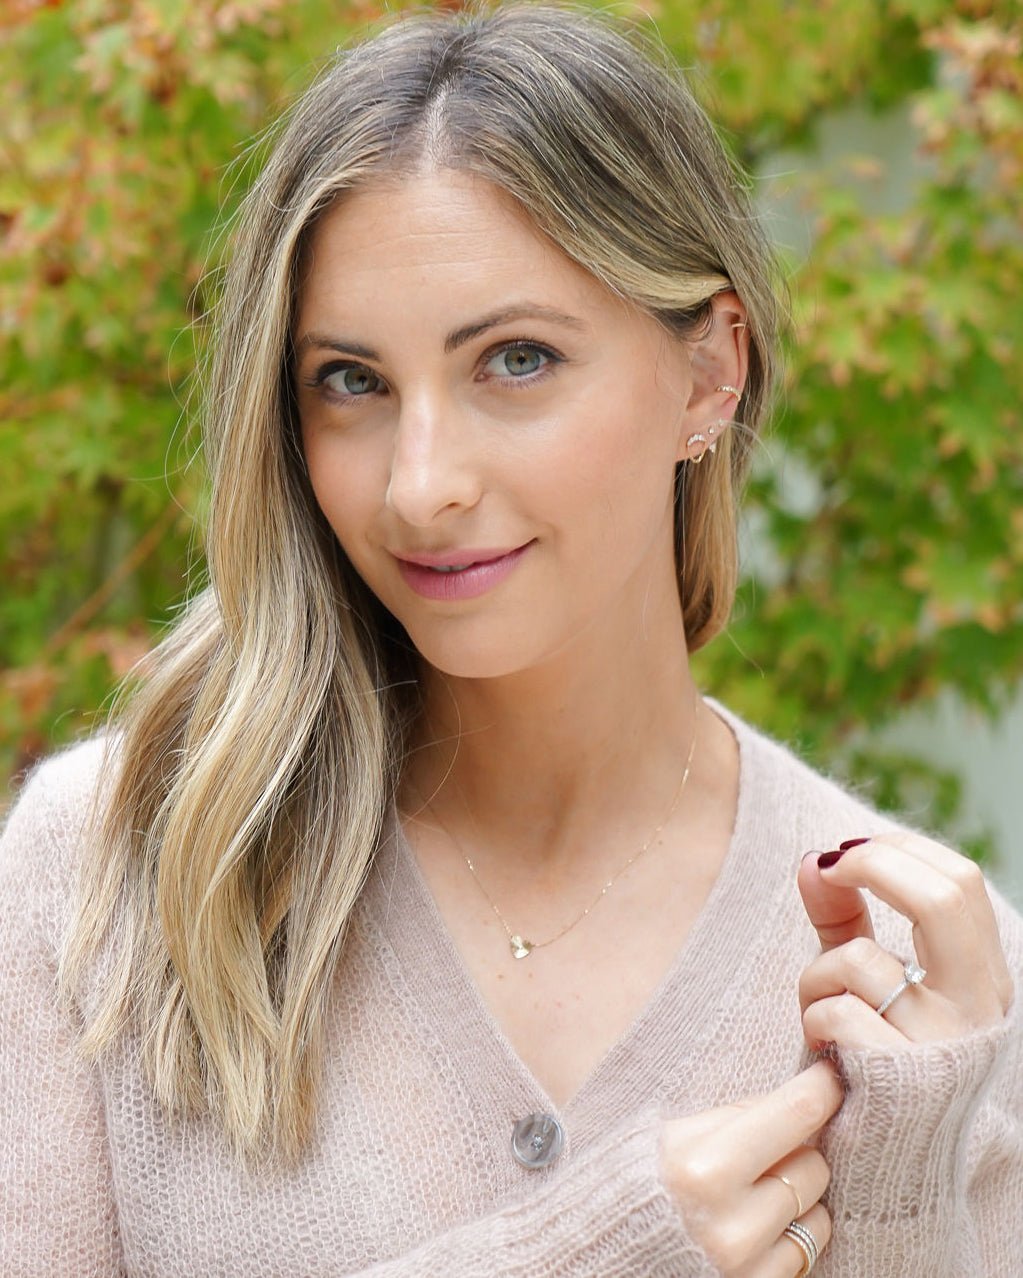 MILL VALLEY DIAMOND HEART NECKLACE - Shop Cupcakes and Cashmere